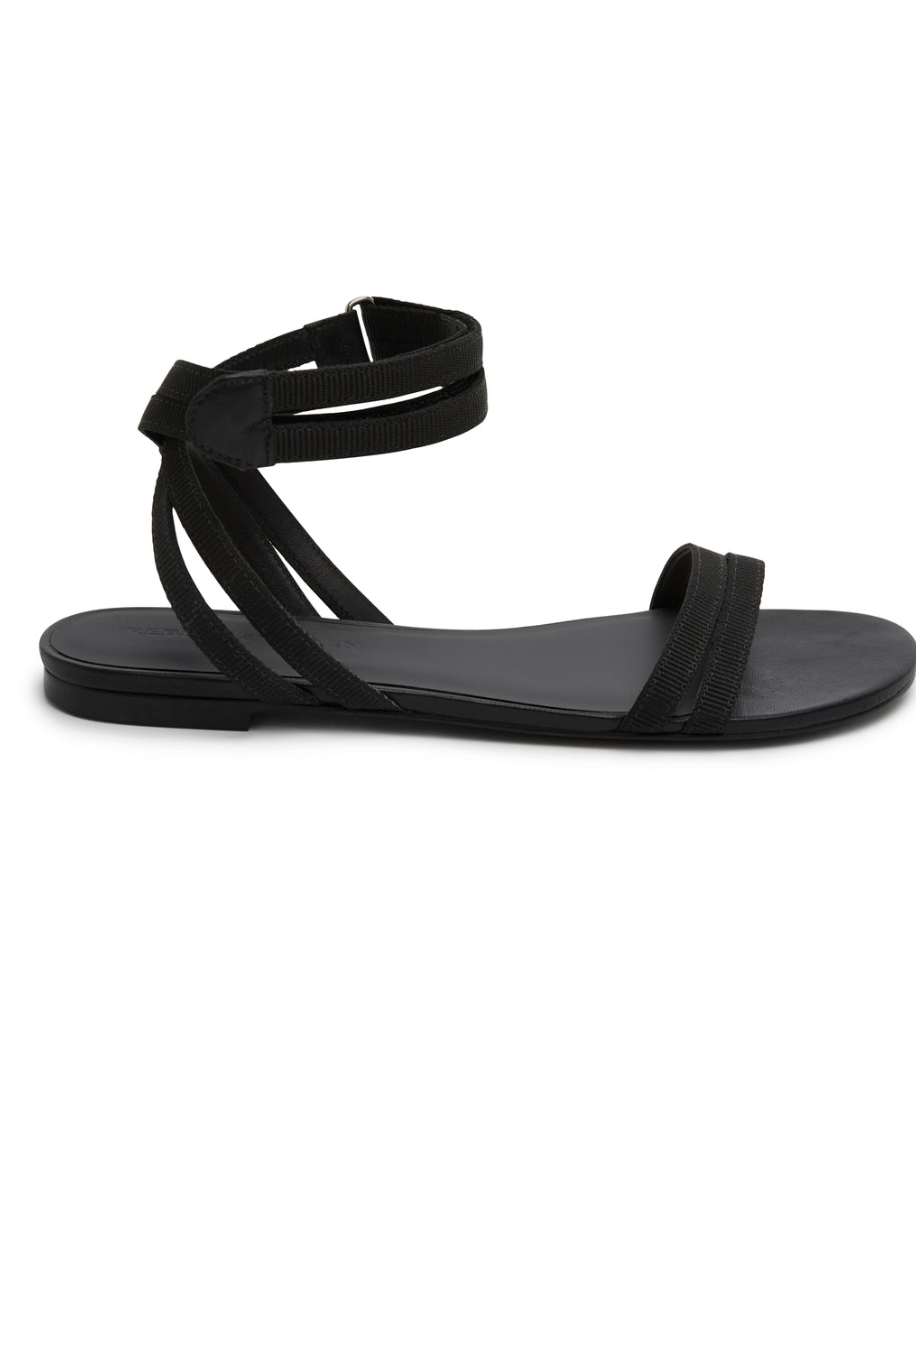 20 Best Beach Sandals and Flip-Flops for Women (2023) – Sand In My Suitcase